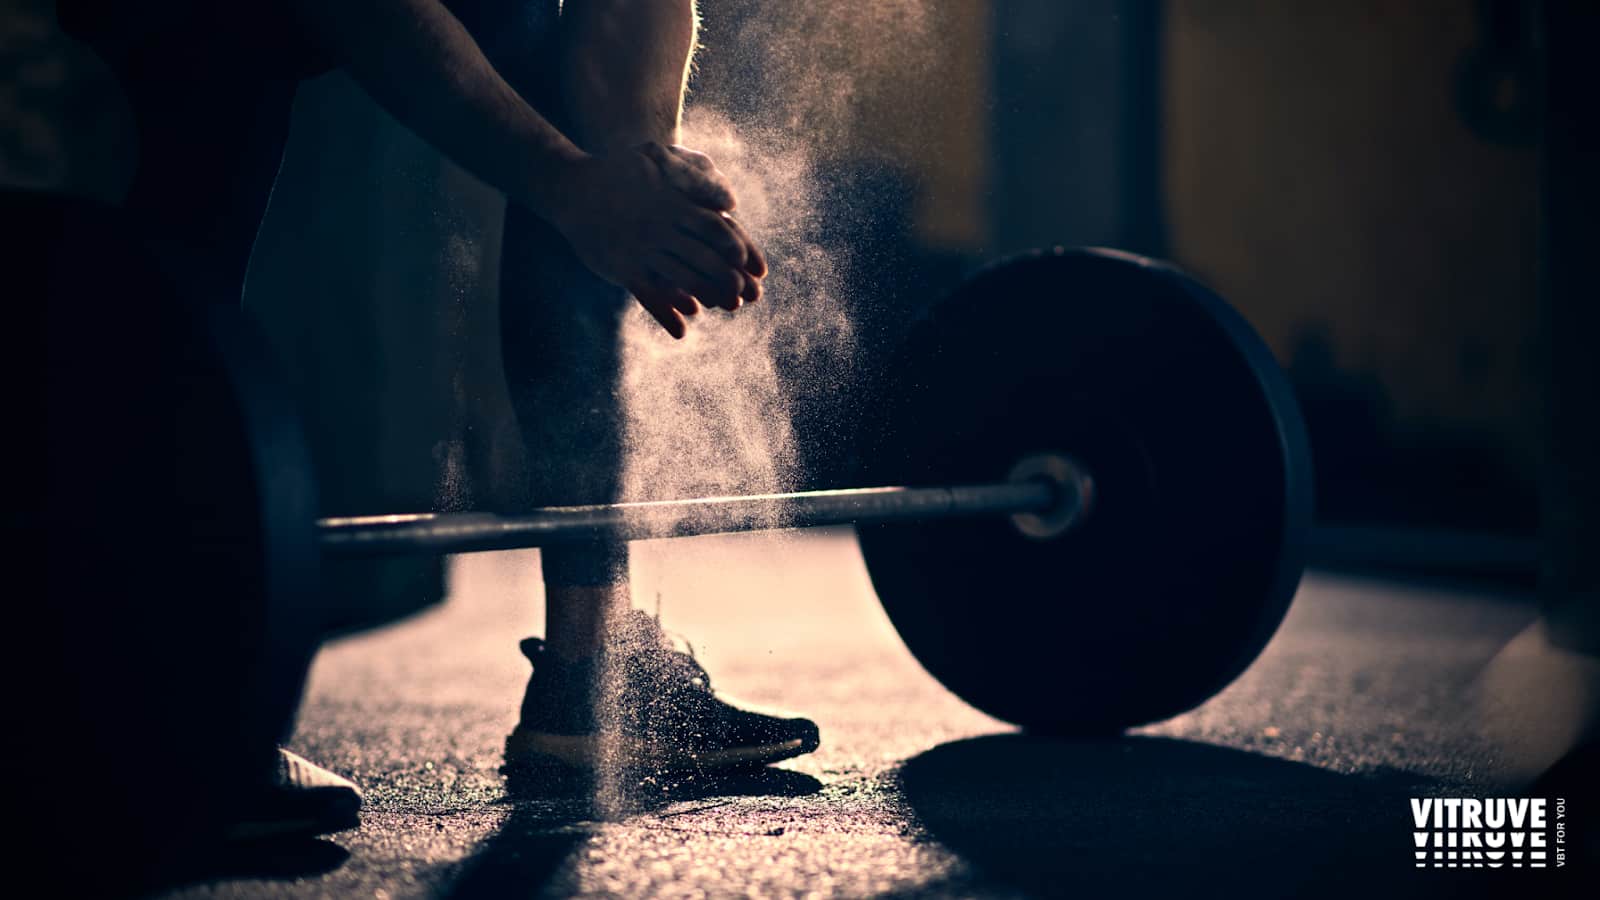 Weight Lifting Technology VBT for High-Performance Athletes - Vitruve